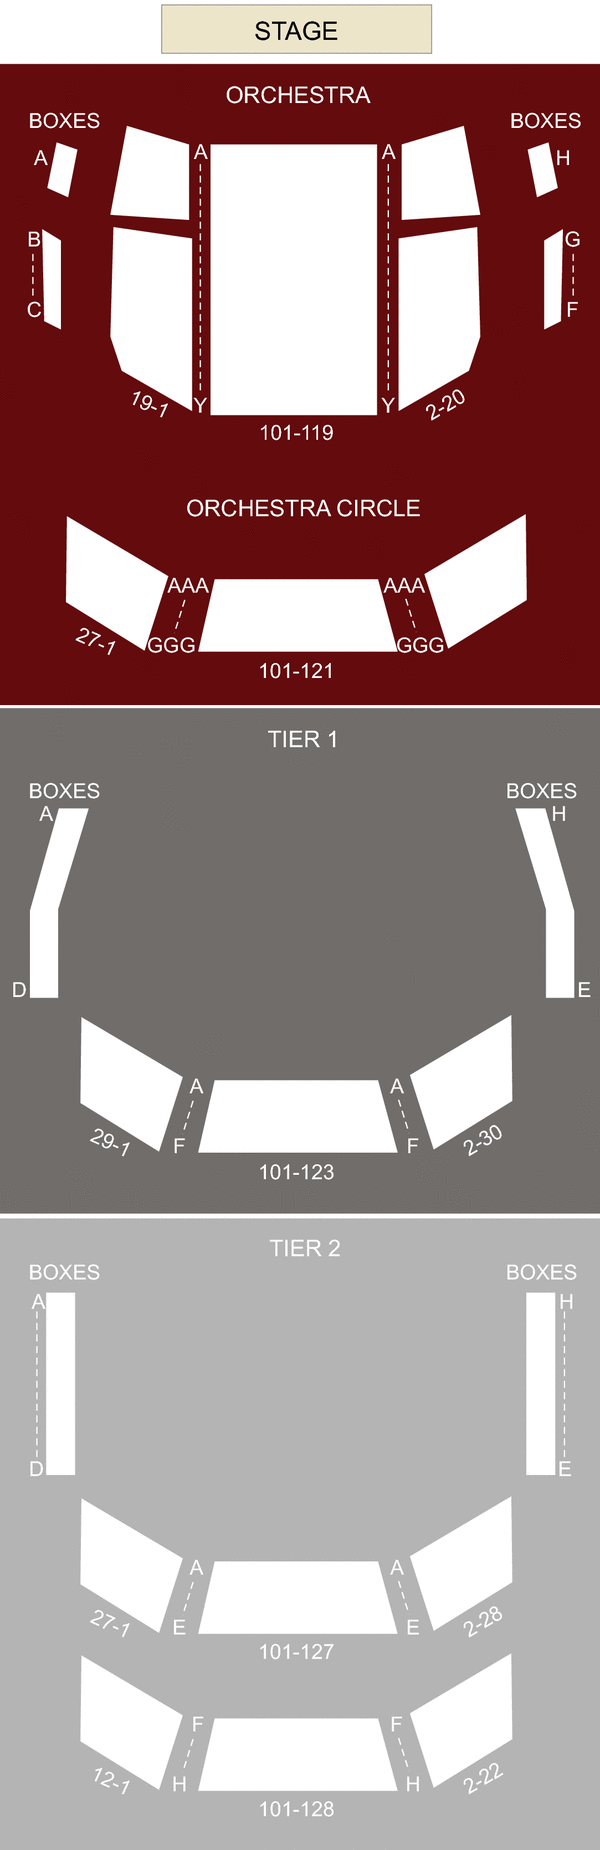 Holland Performing Arts Center - Kiewit Hall Seating Chart